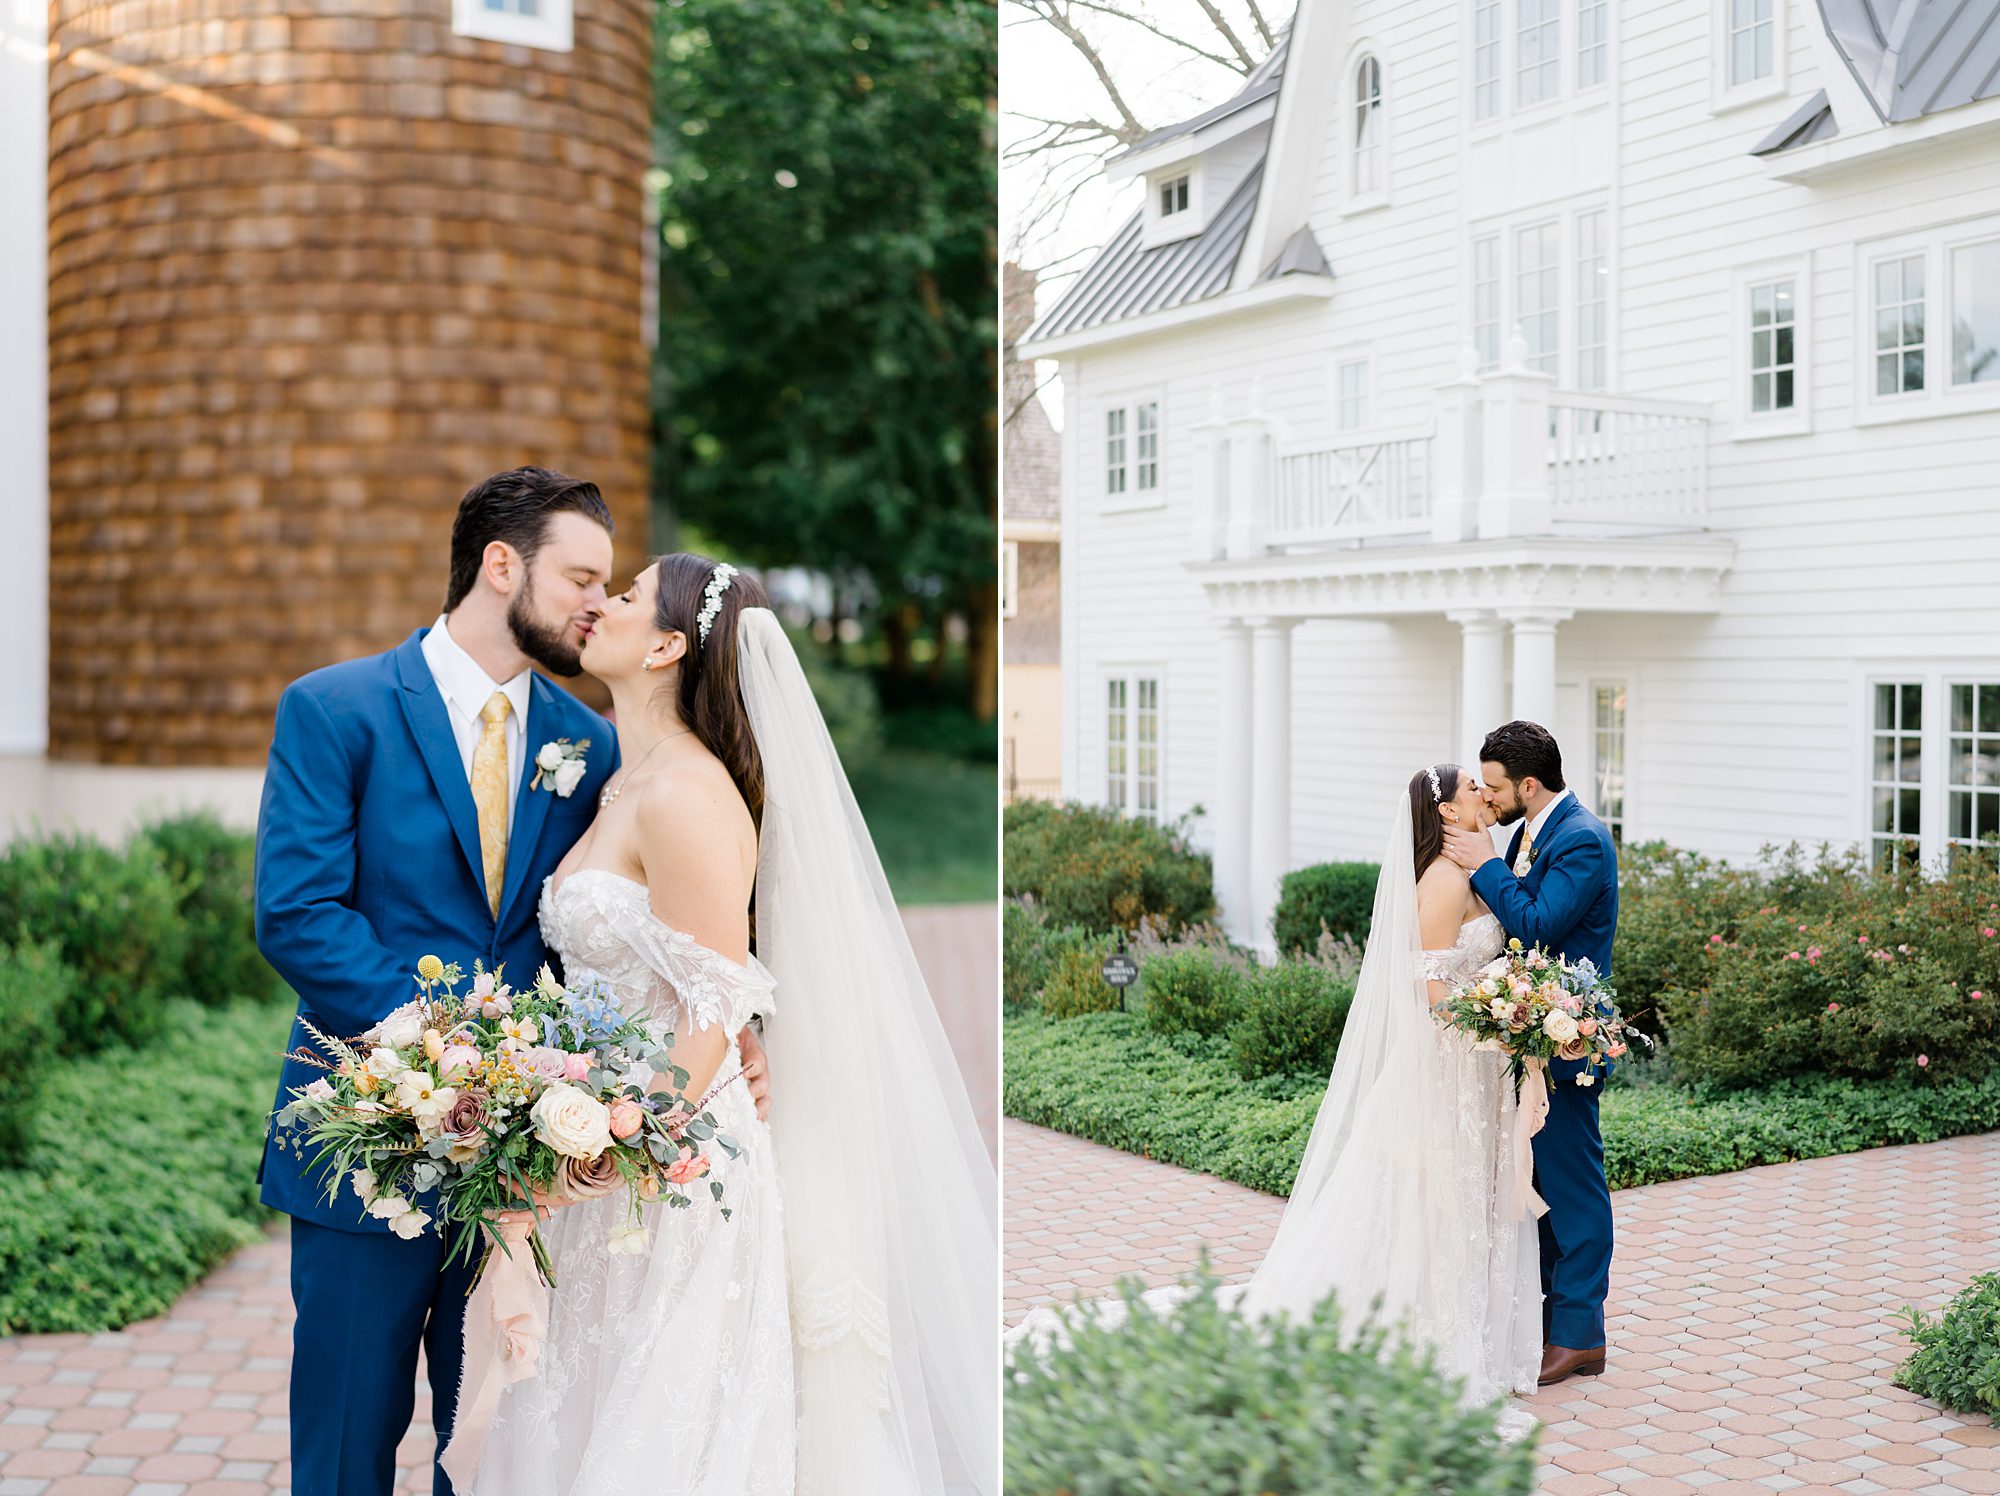 newlyweds kiss after garden inspired wedding ceremony